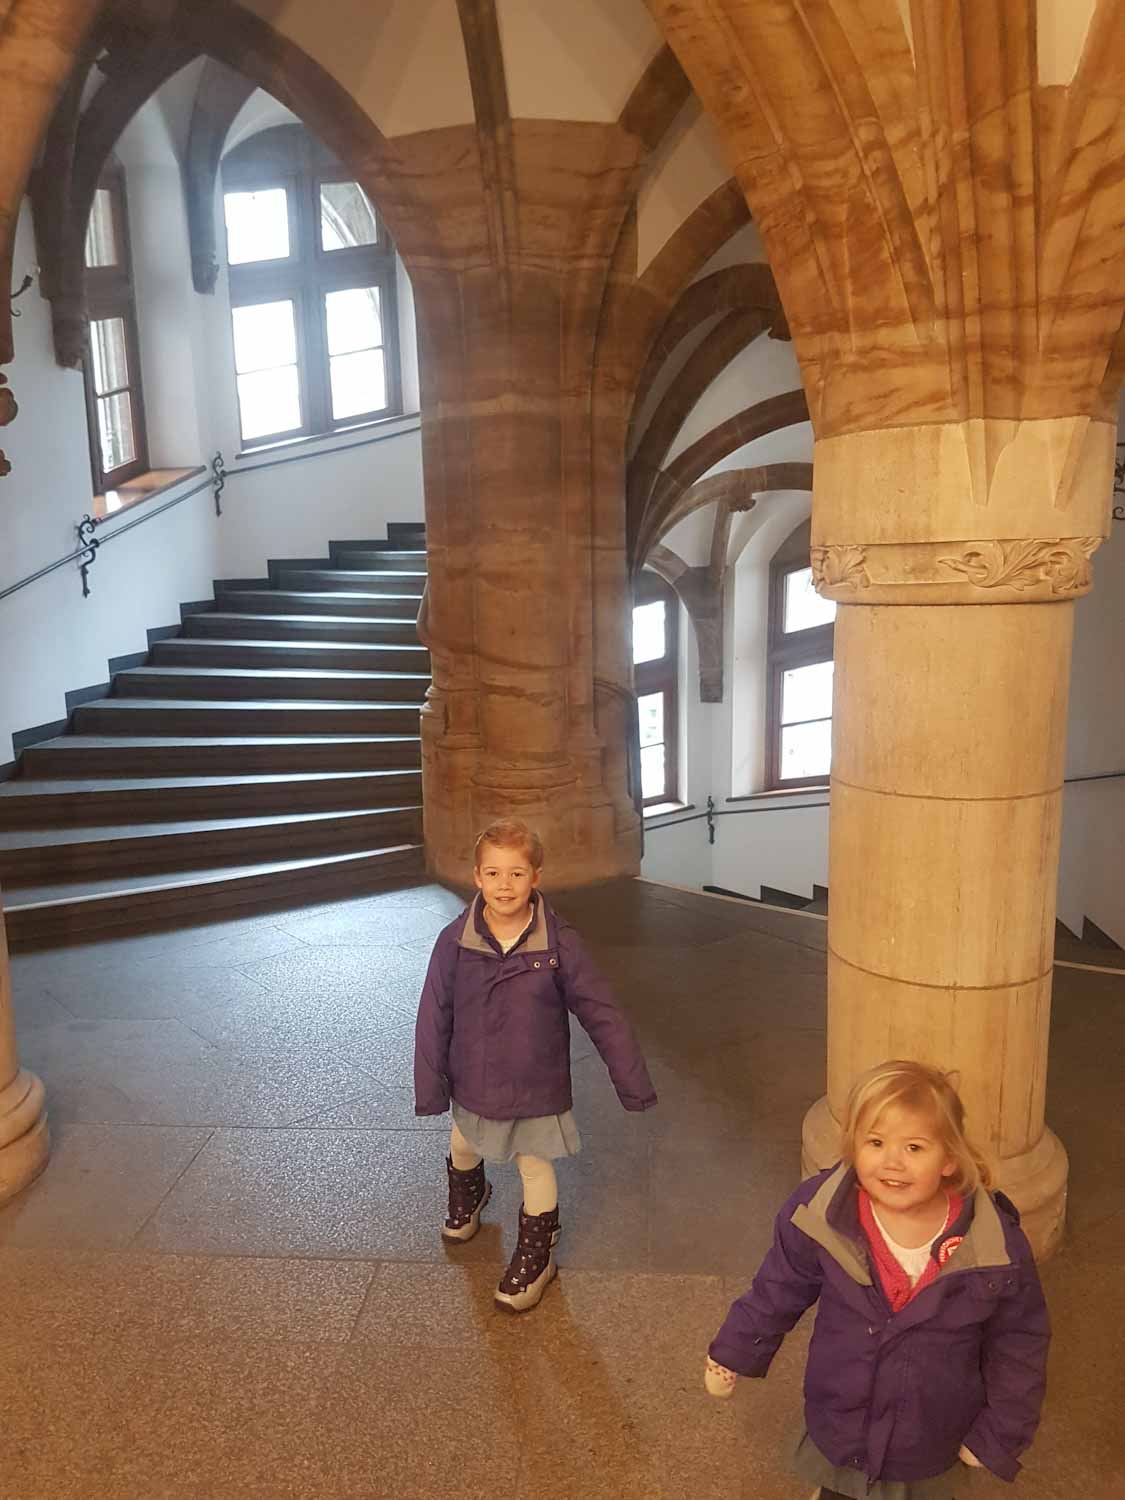 2 young girls exploring a stone spiral staircase, with vaulted ceiling